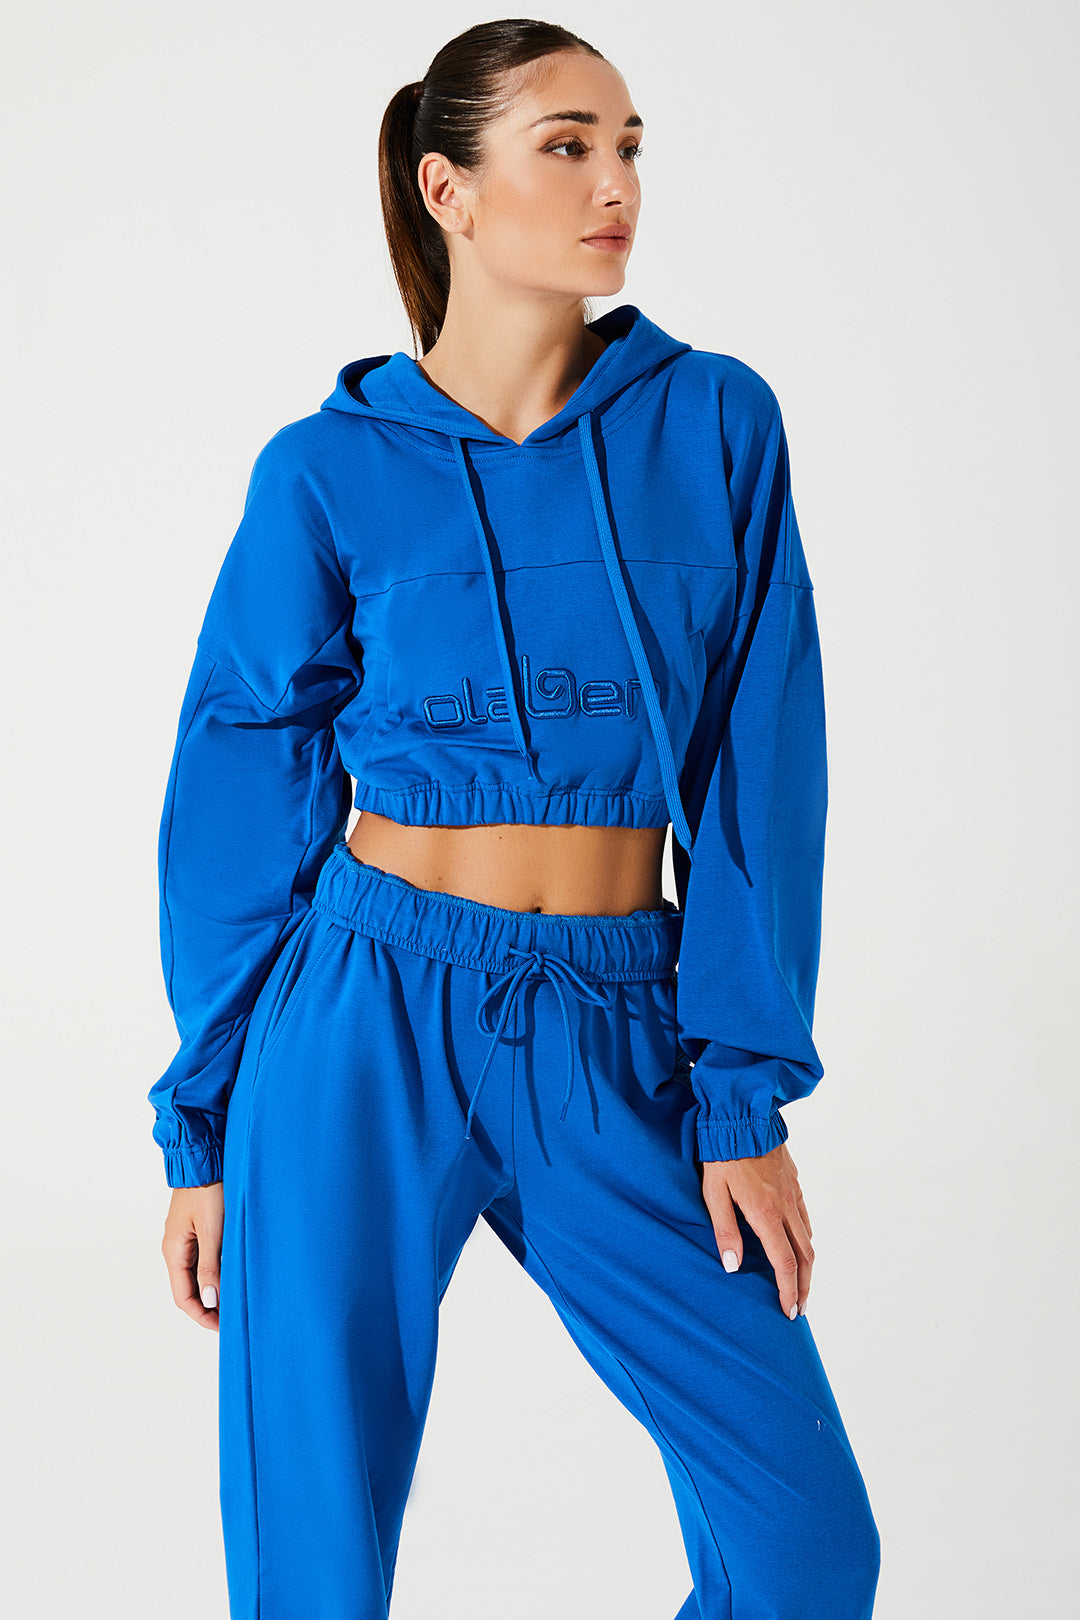 Stylish Atlantis Blue women's hoodie with a cropped design, perfect for casual fashion enthusiasts.